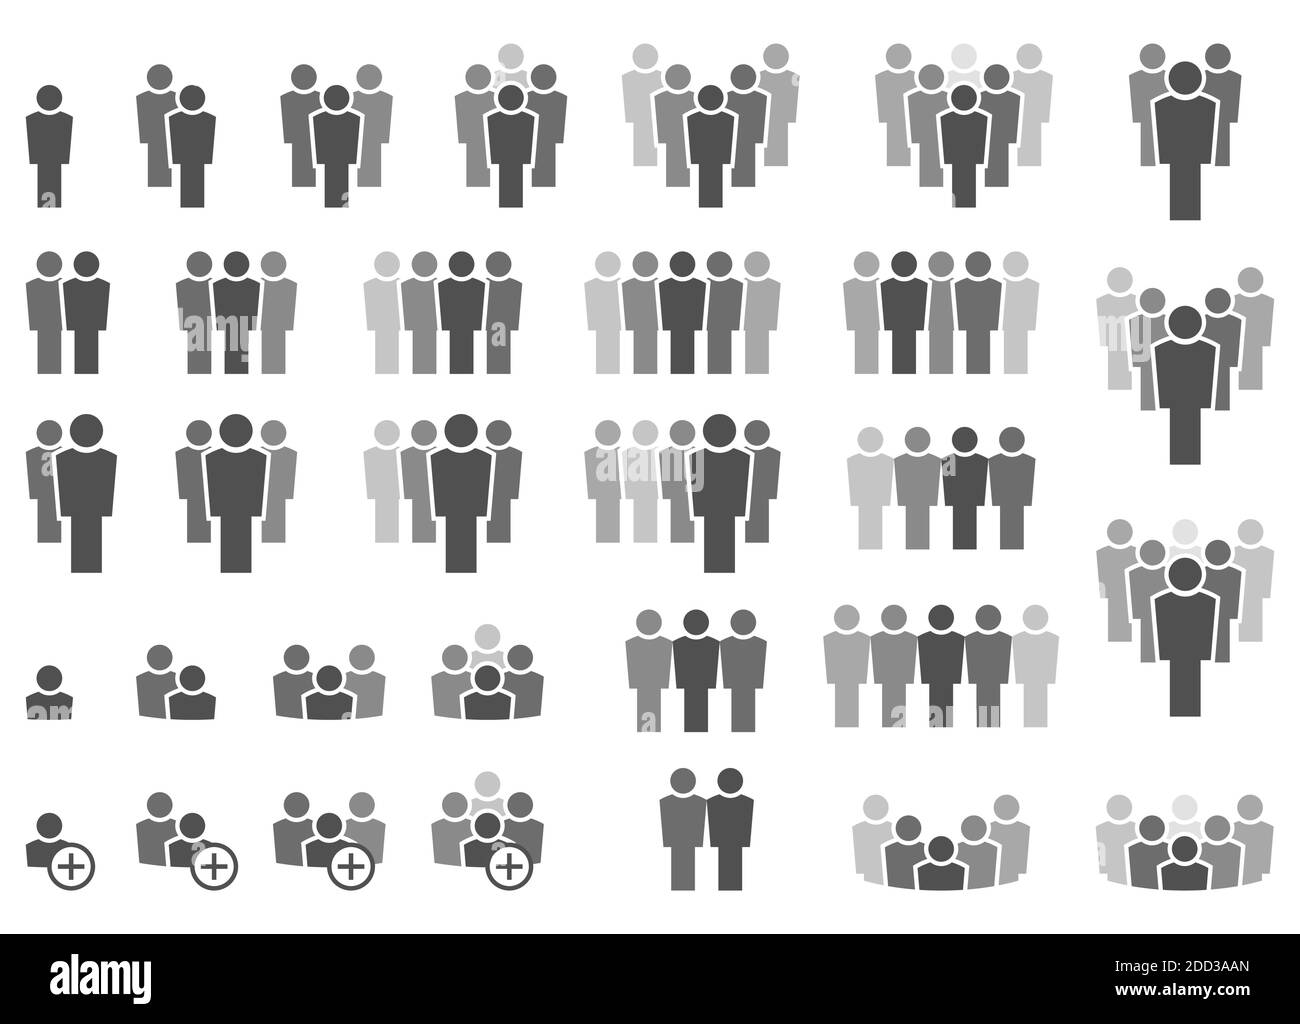 EPS vector illustration showing a collection of many different icons with typical teamwork or leading business situations Stock Vector